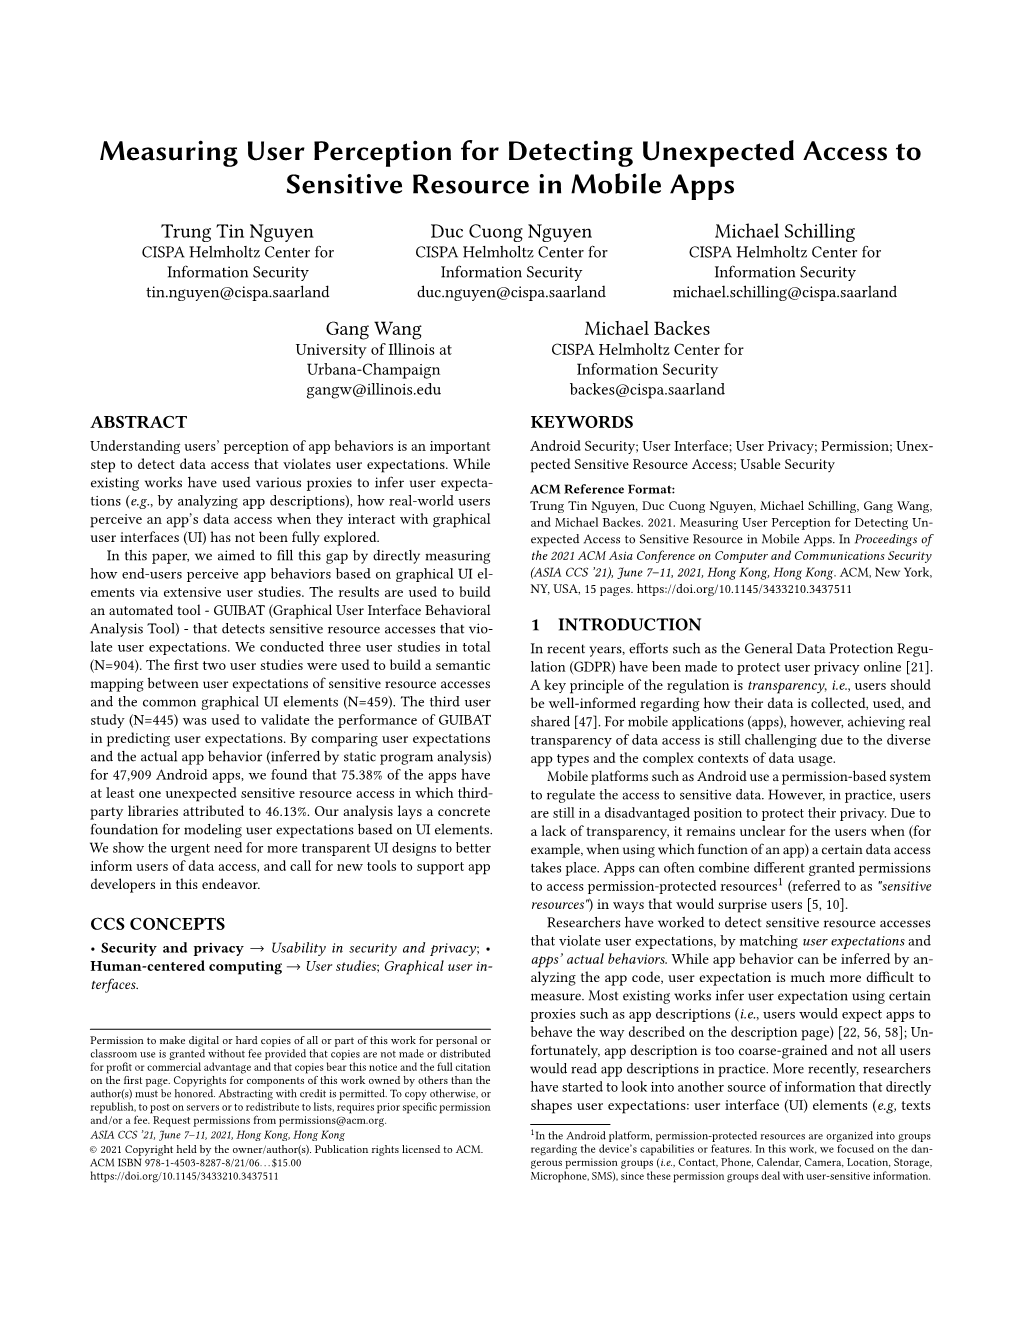 Measuring User Perception for Detecting Unexpected Access to Sensitive Resource in Mobile Apps